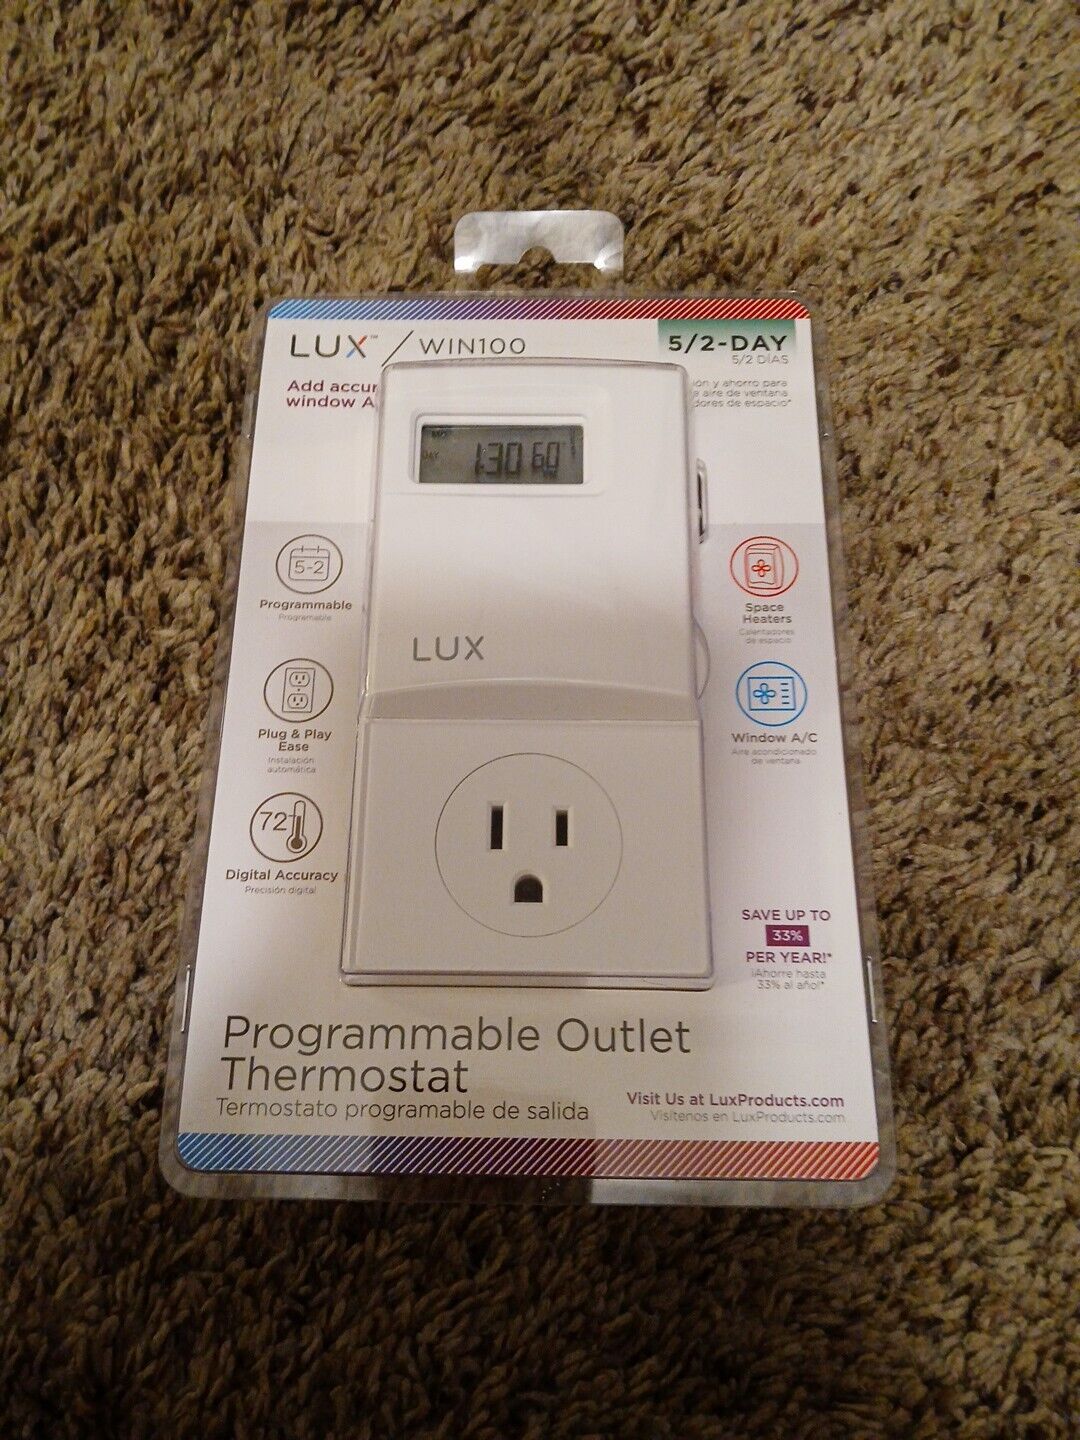 Lux Smart Temp Win 100 Series, 5-2 Programmable Outlet Thermostat